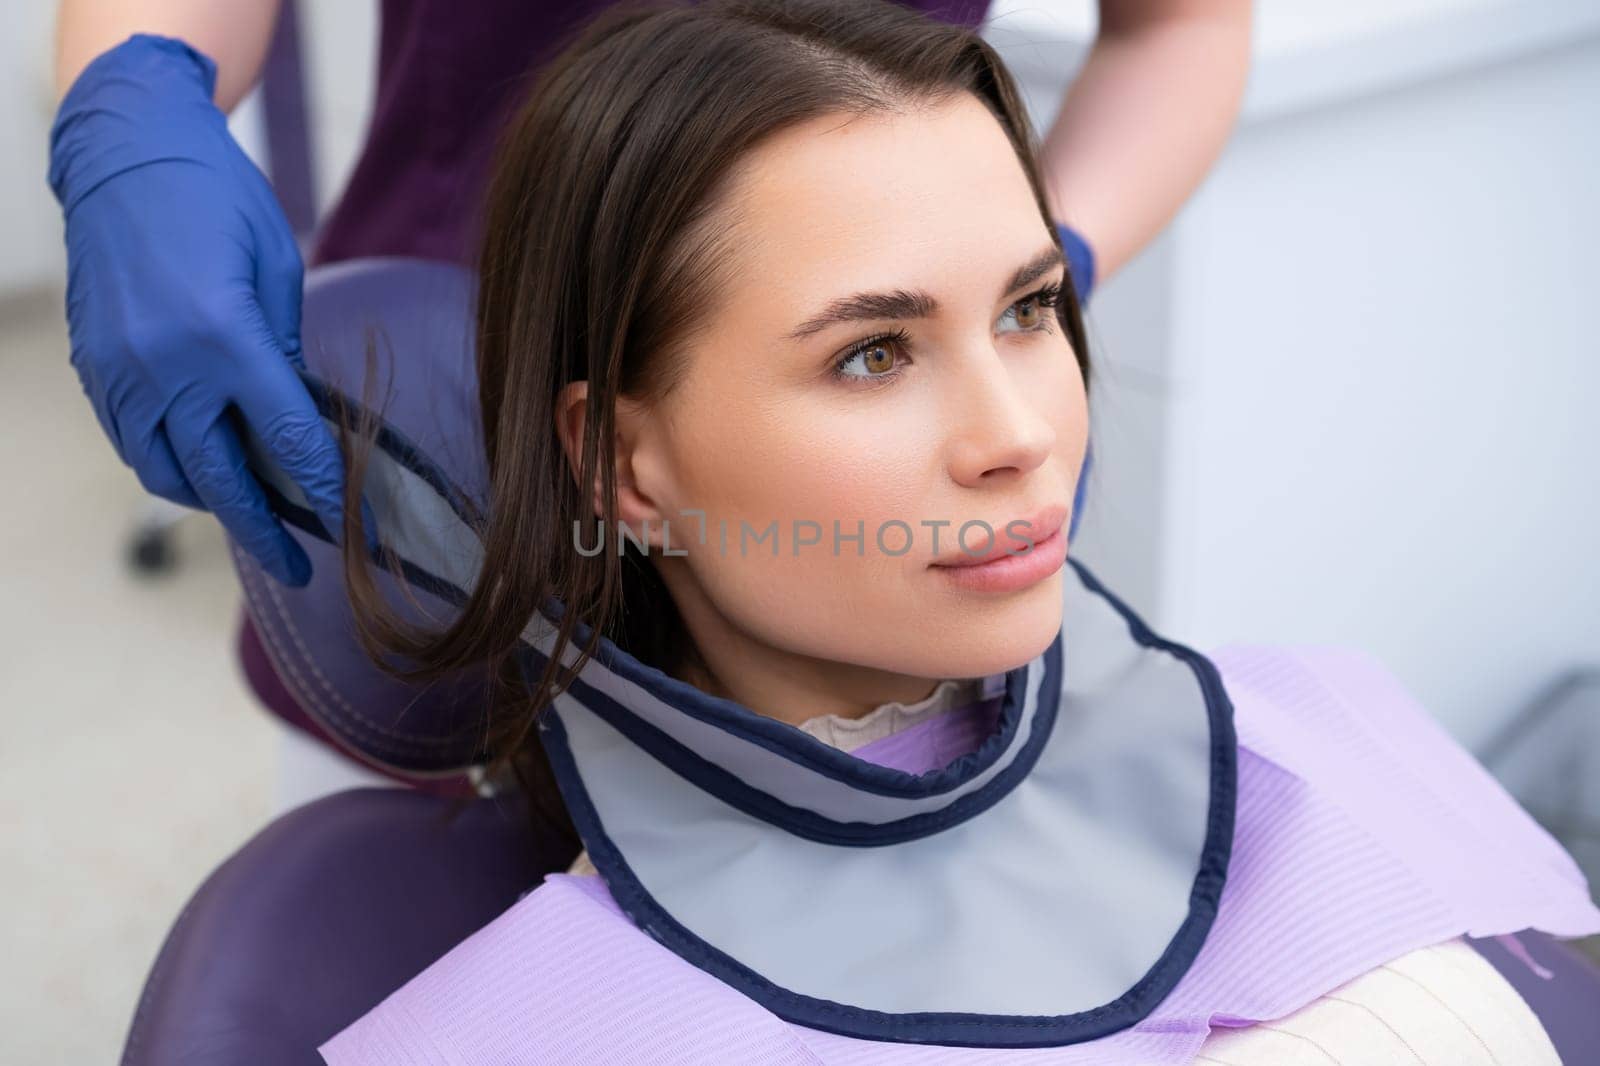 The dental assistant outfits the patient with a protective neck shield before commencing the tooth X-ray procedure.